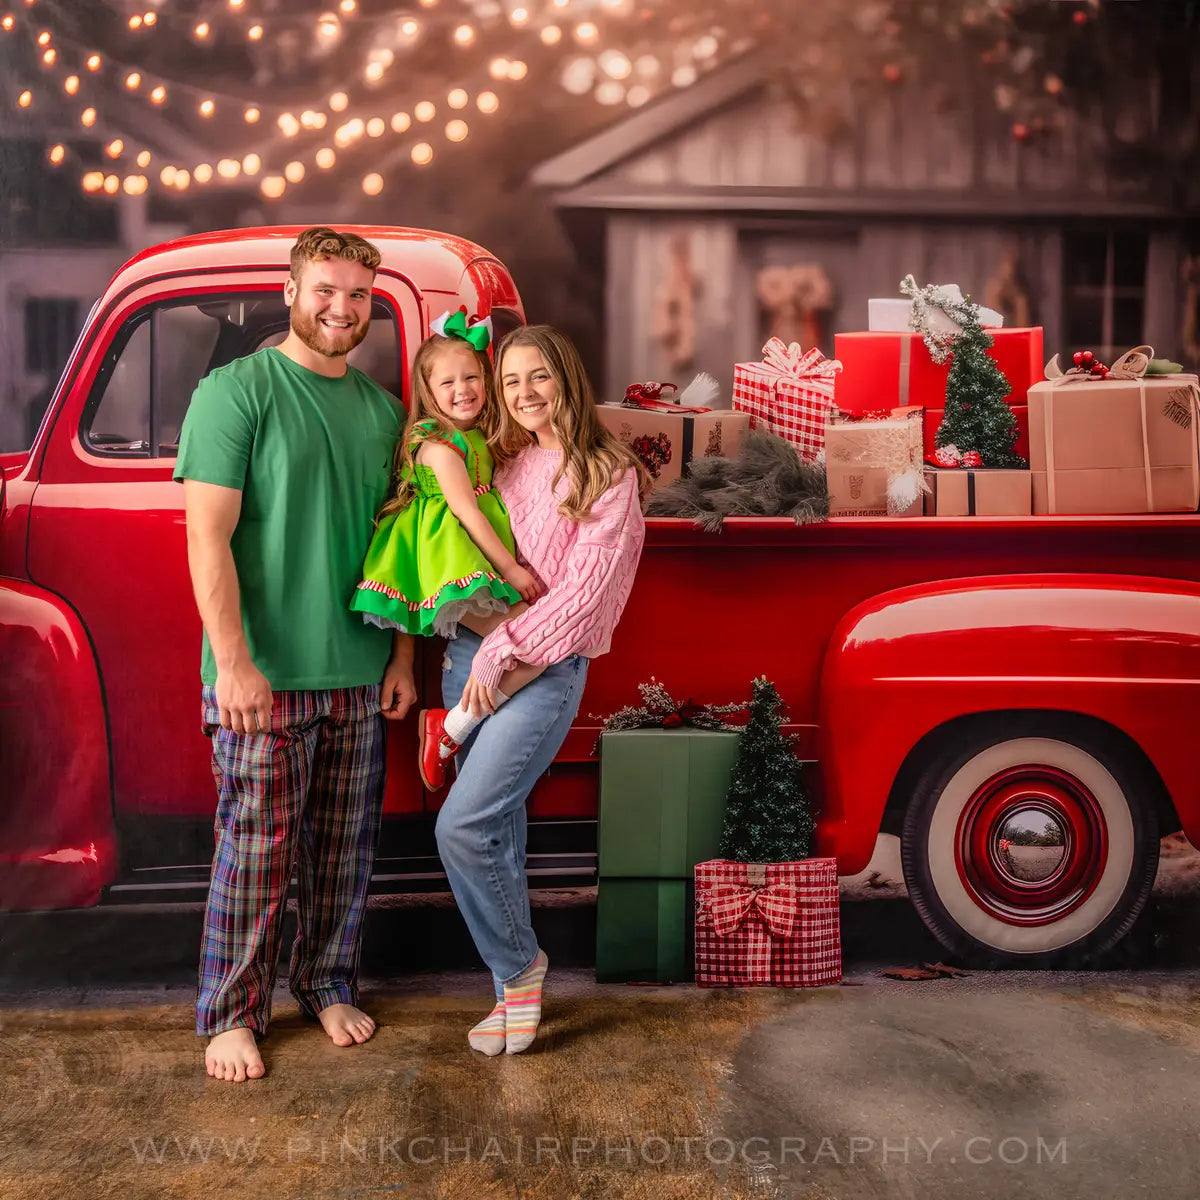 Kate Christmas Gift in Red Truck Backdrop for Photography